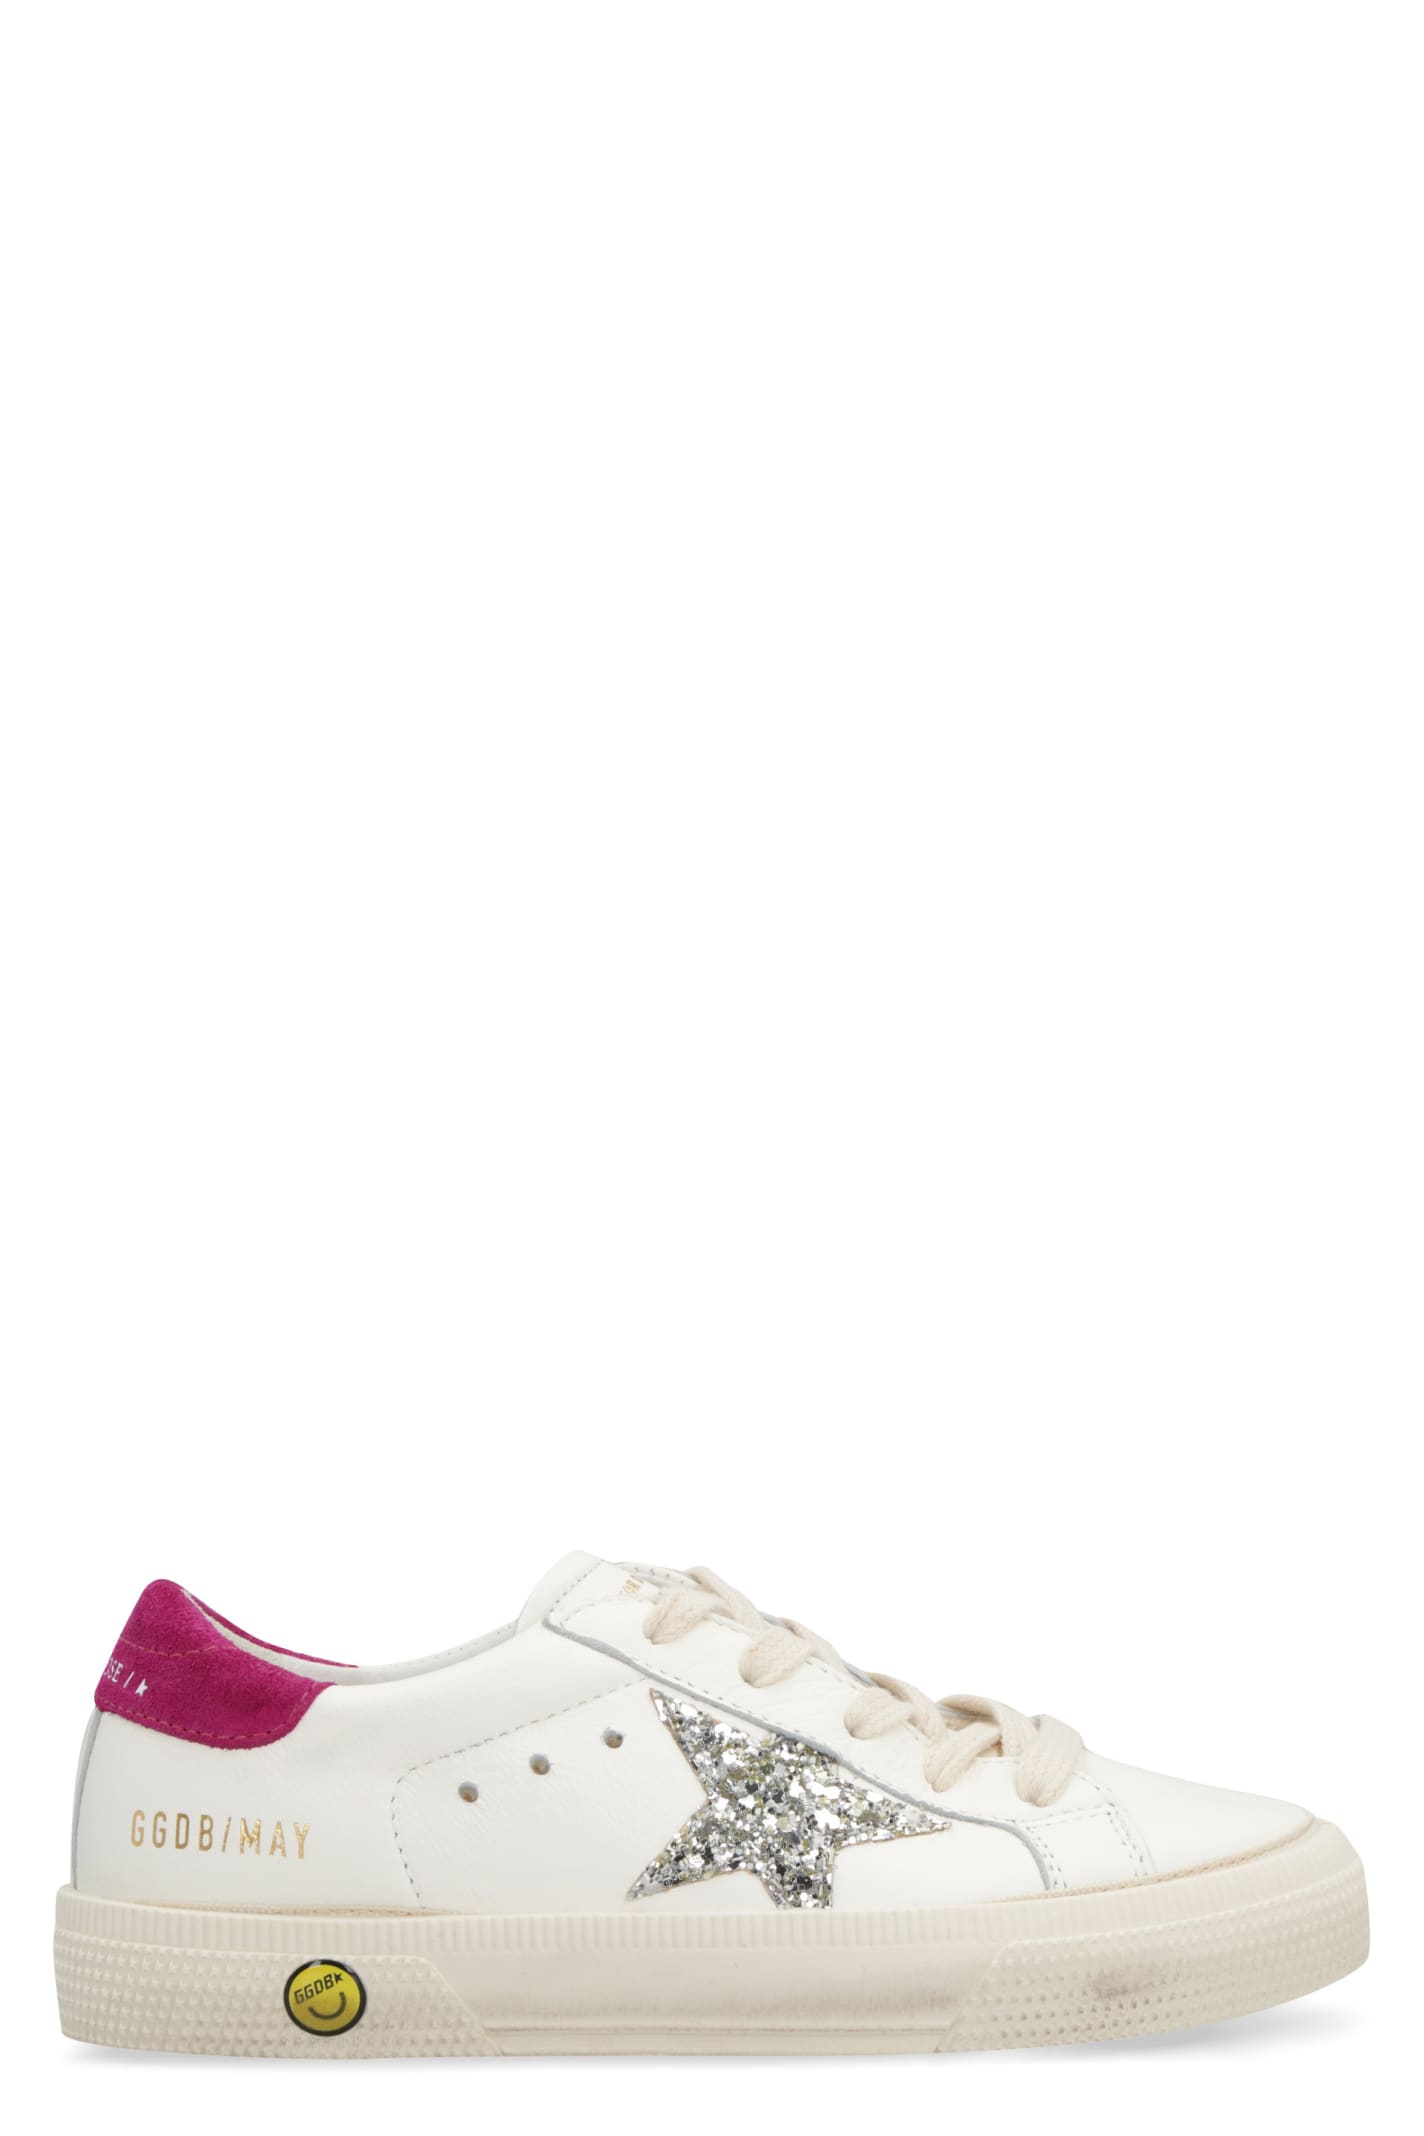 Golden Goose May Leather Sneakers